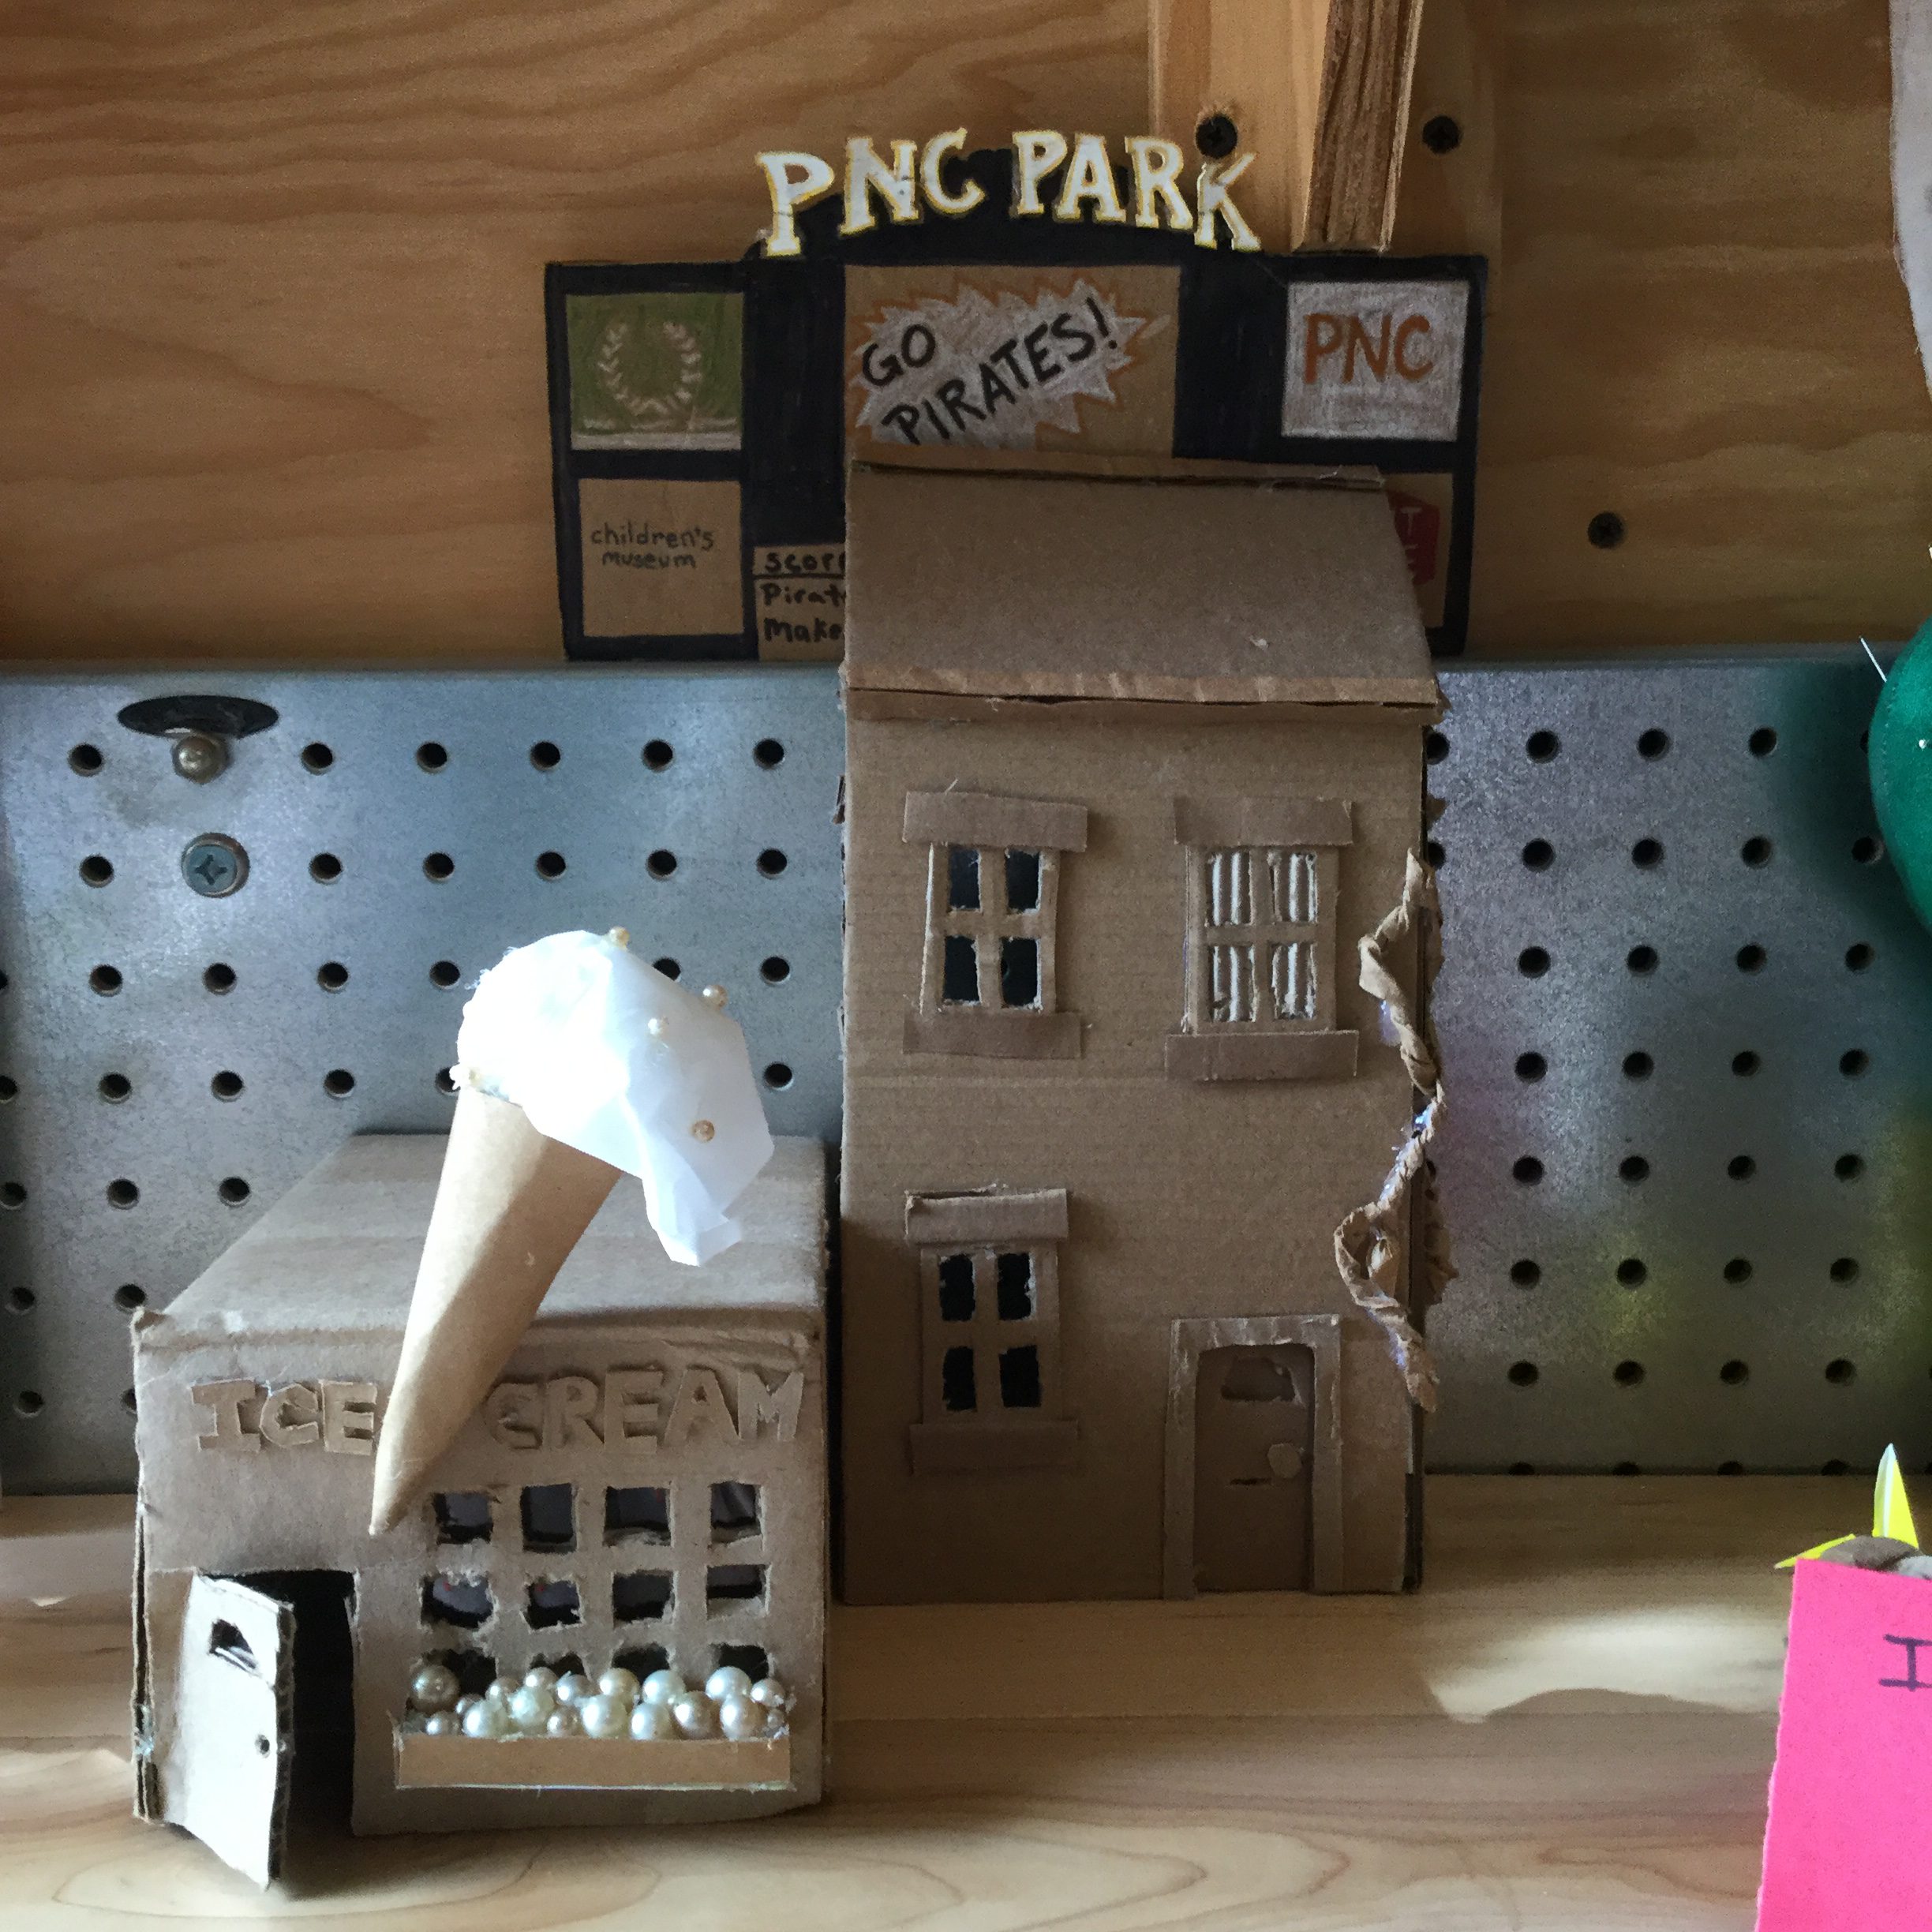 Two small-scale building made of cardboard and other recycled materials sit on a table. One is an ice cream shop and the other is a house.